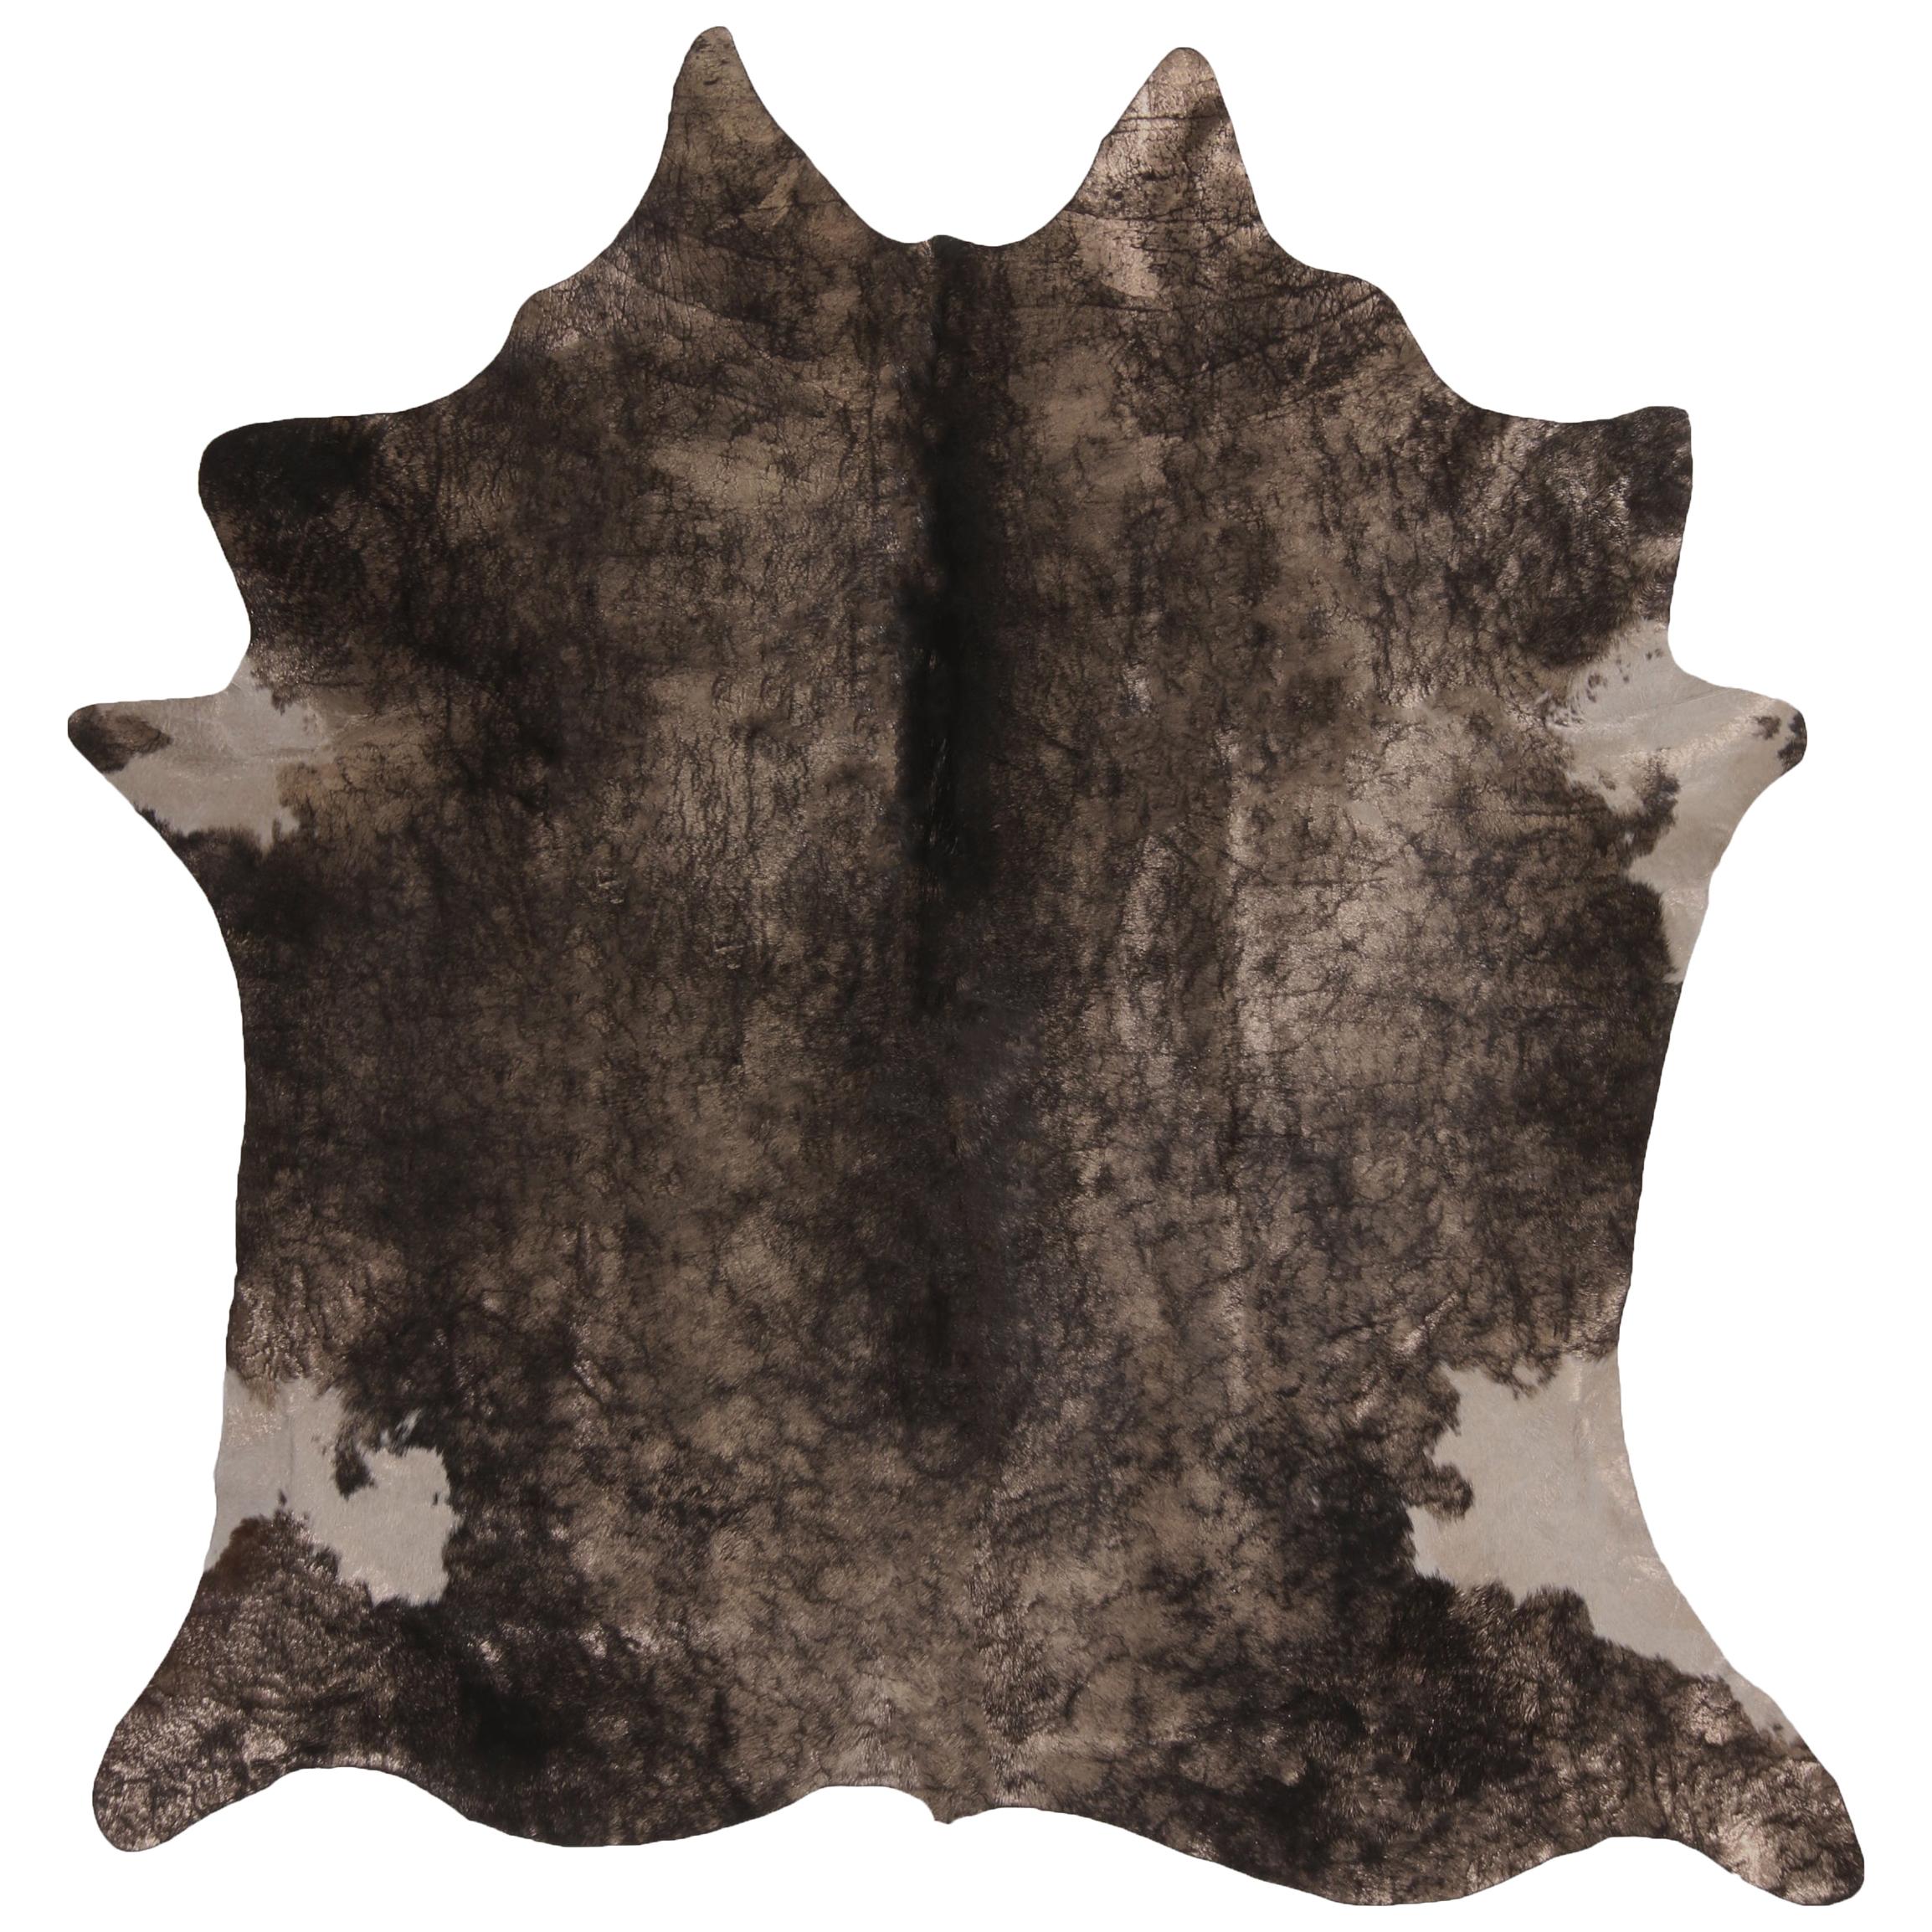 Contemporary Gray and White Large Leather Cowhide Rug